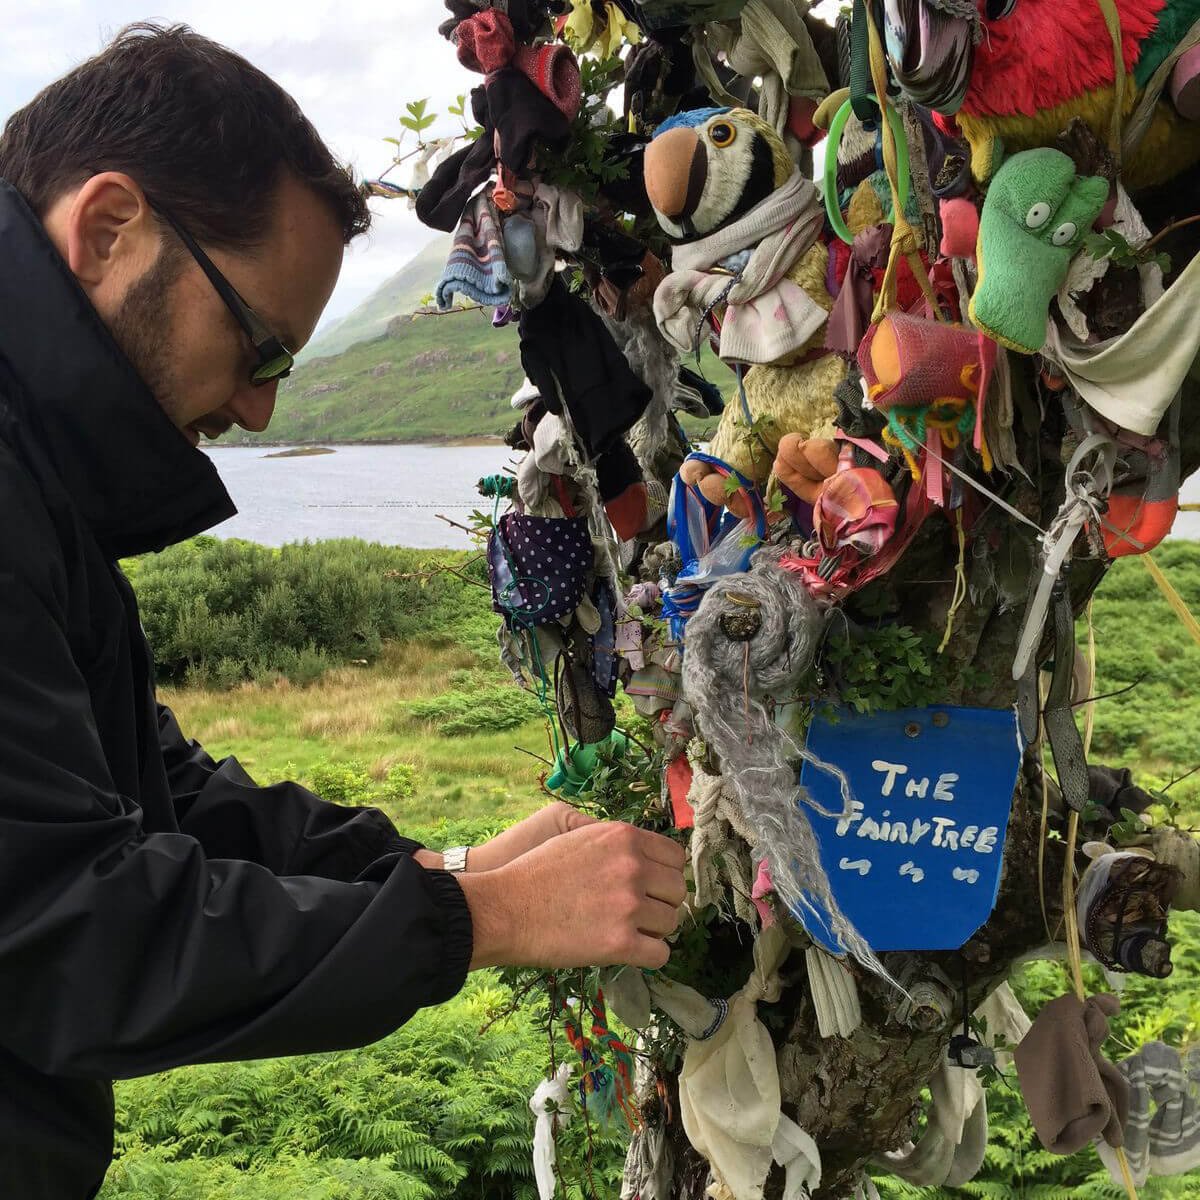 Fastening a charm to a fairy rag tree in Ireland